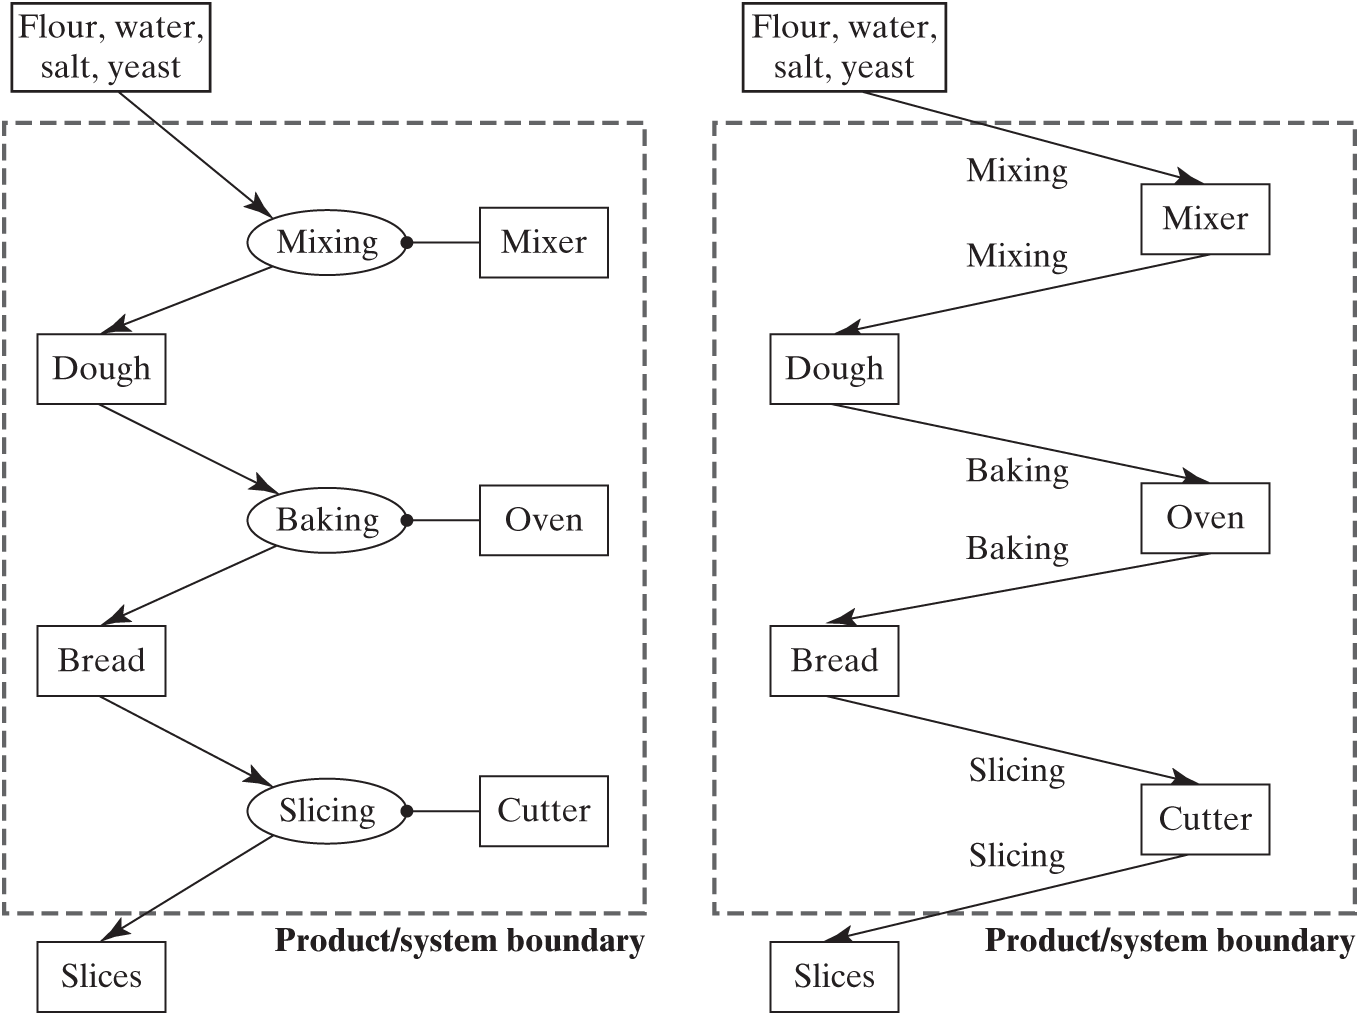 Two diagrams of projection onto the objects of making sliced bread. Each part denoted with a labeled rectangle or oval.